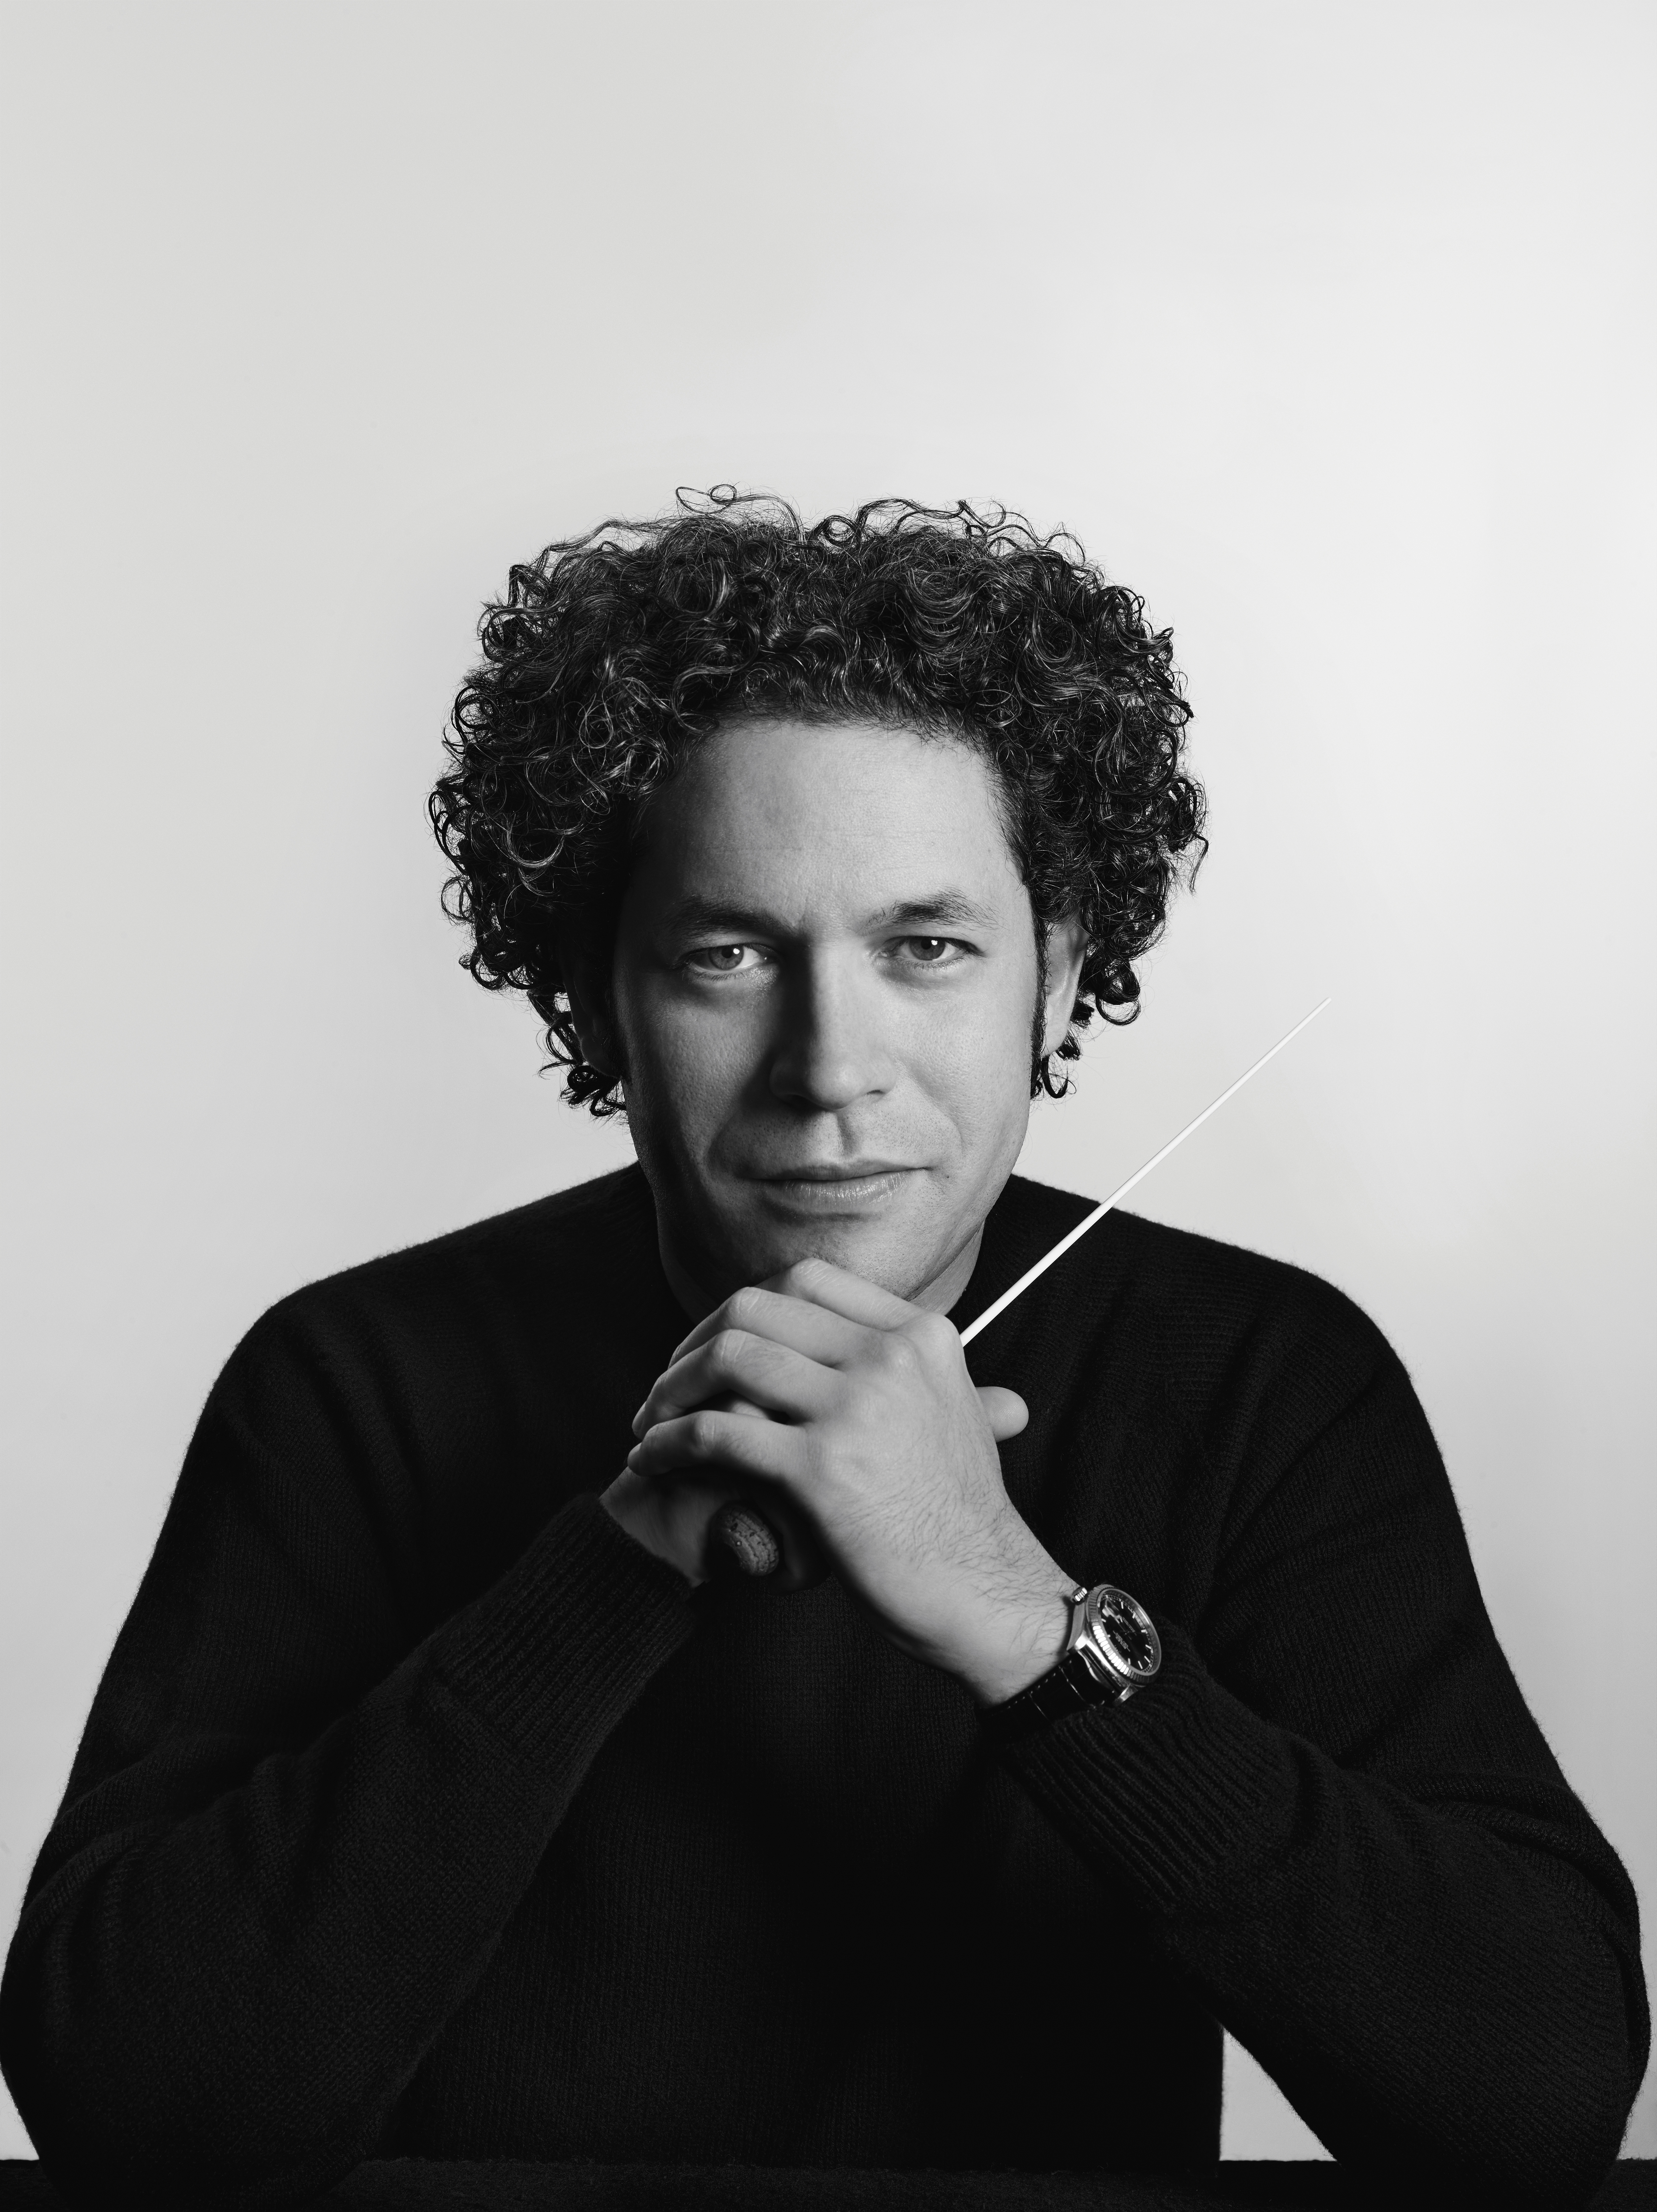 Gustavo Dudamel to Conduct Score for 'West Side Story' – The